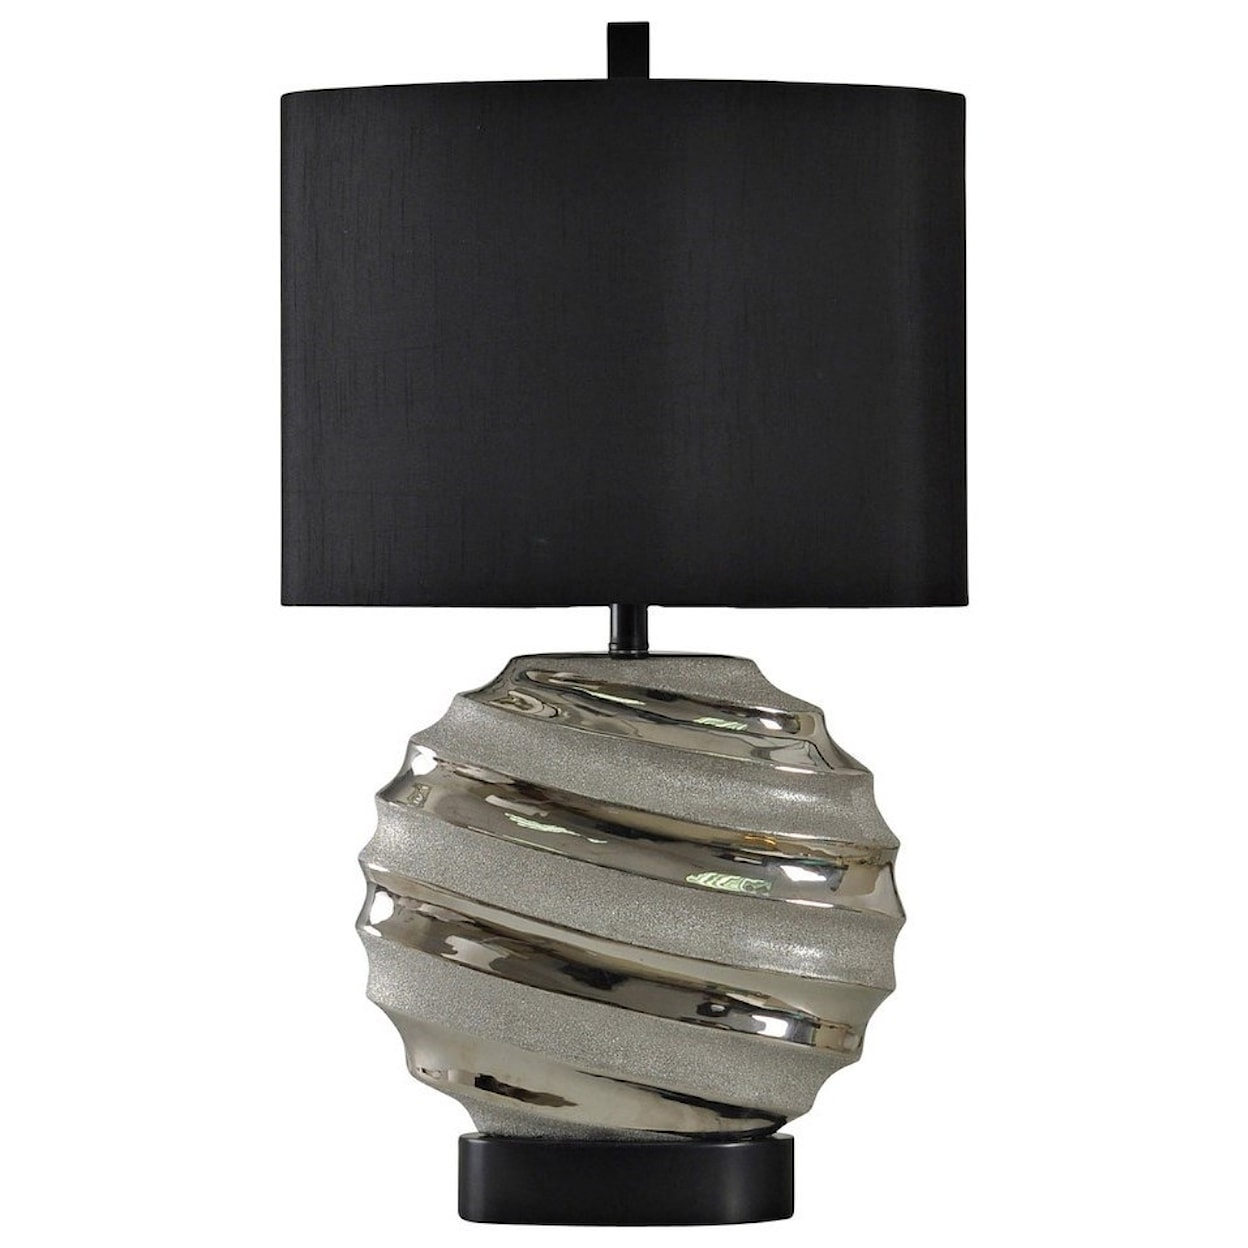 StyleCraft Lamps Table Lamp